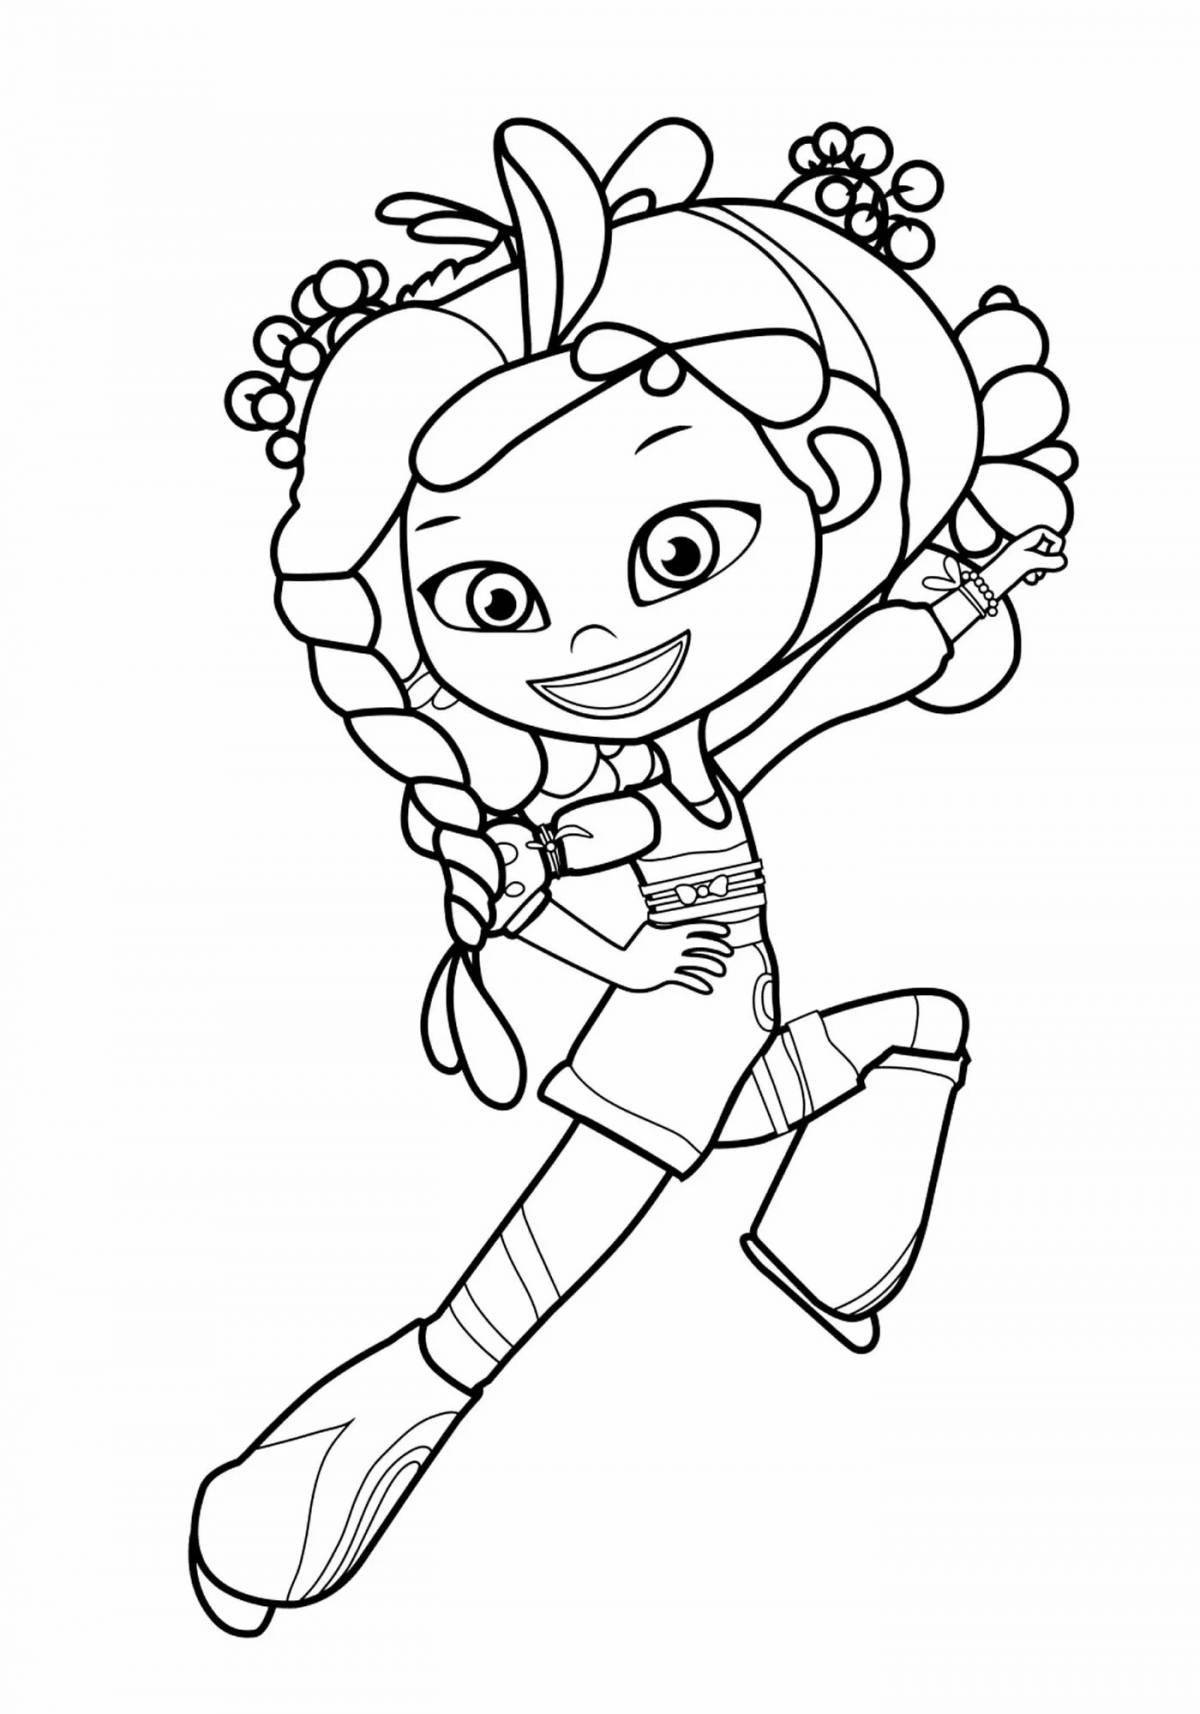 Amazing patrol coloring page for 6-7 year olds